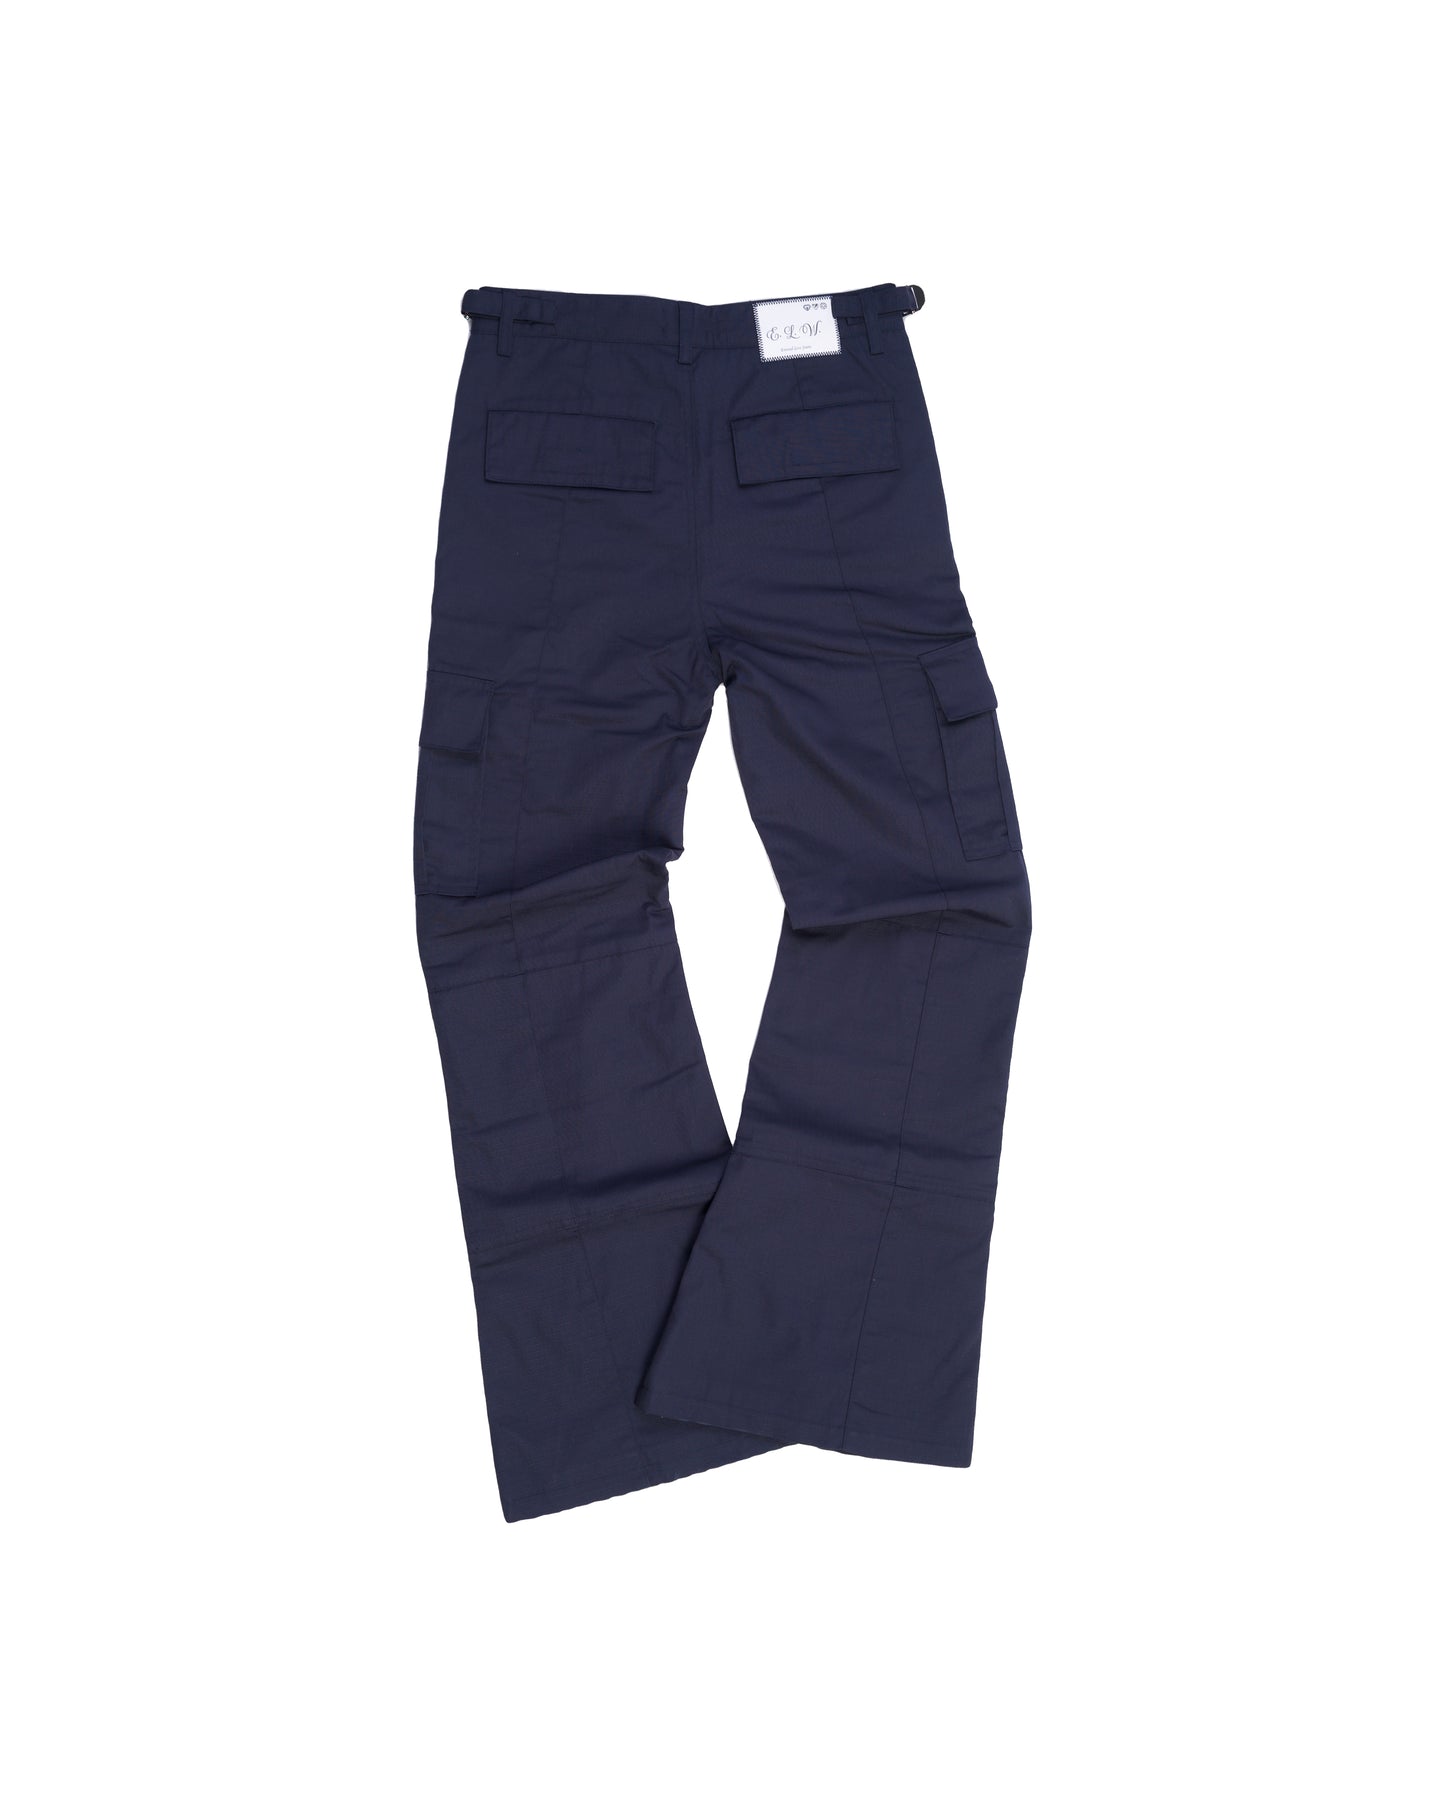 NAVY FLARED RIP STOP CARGO PANTS